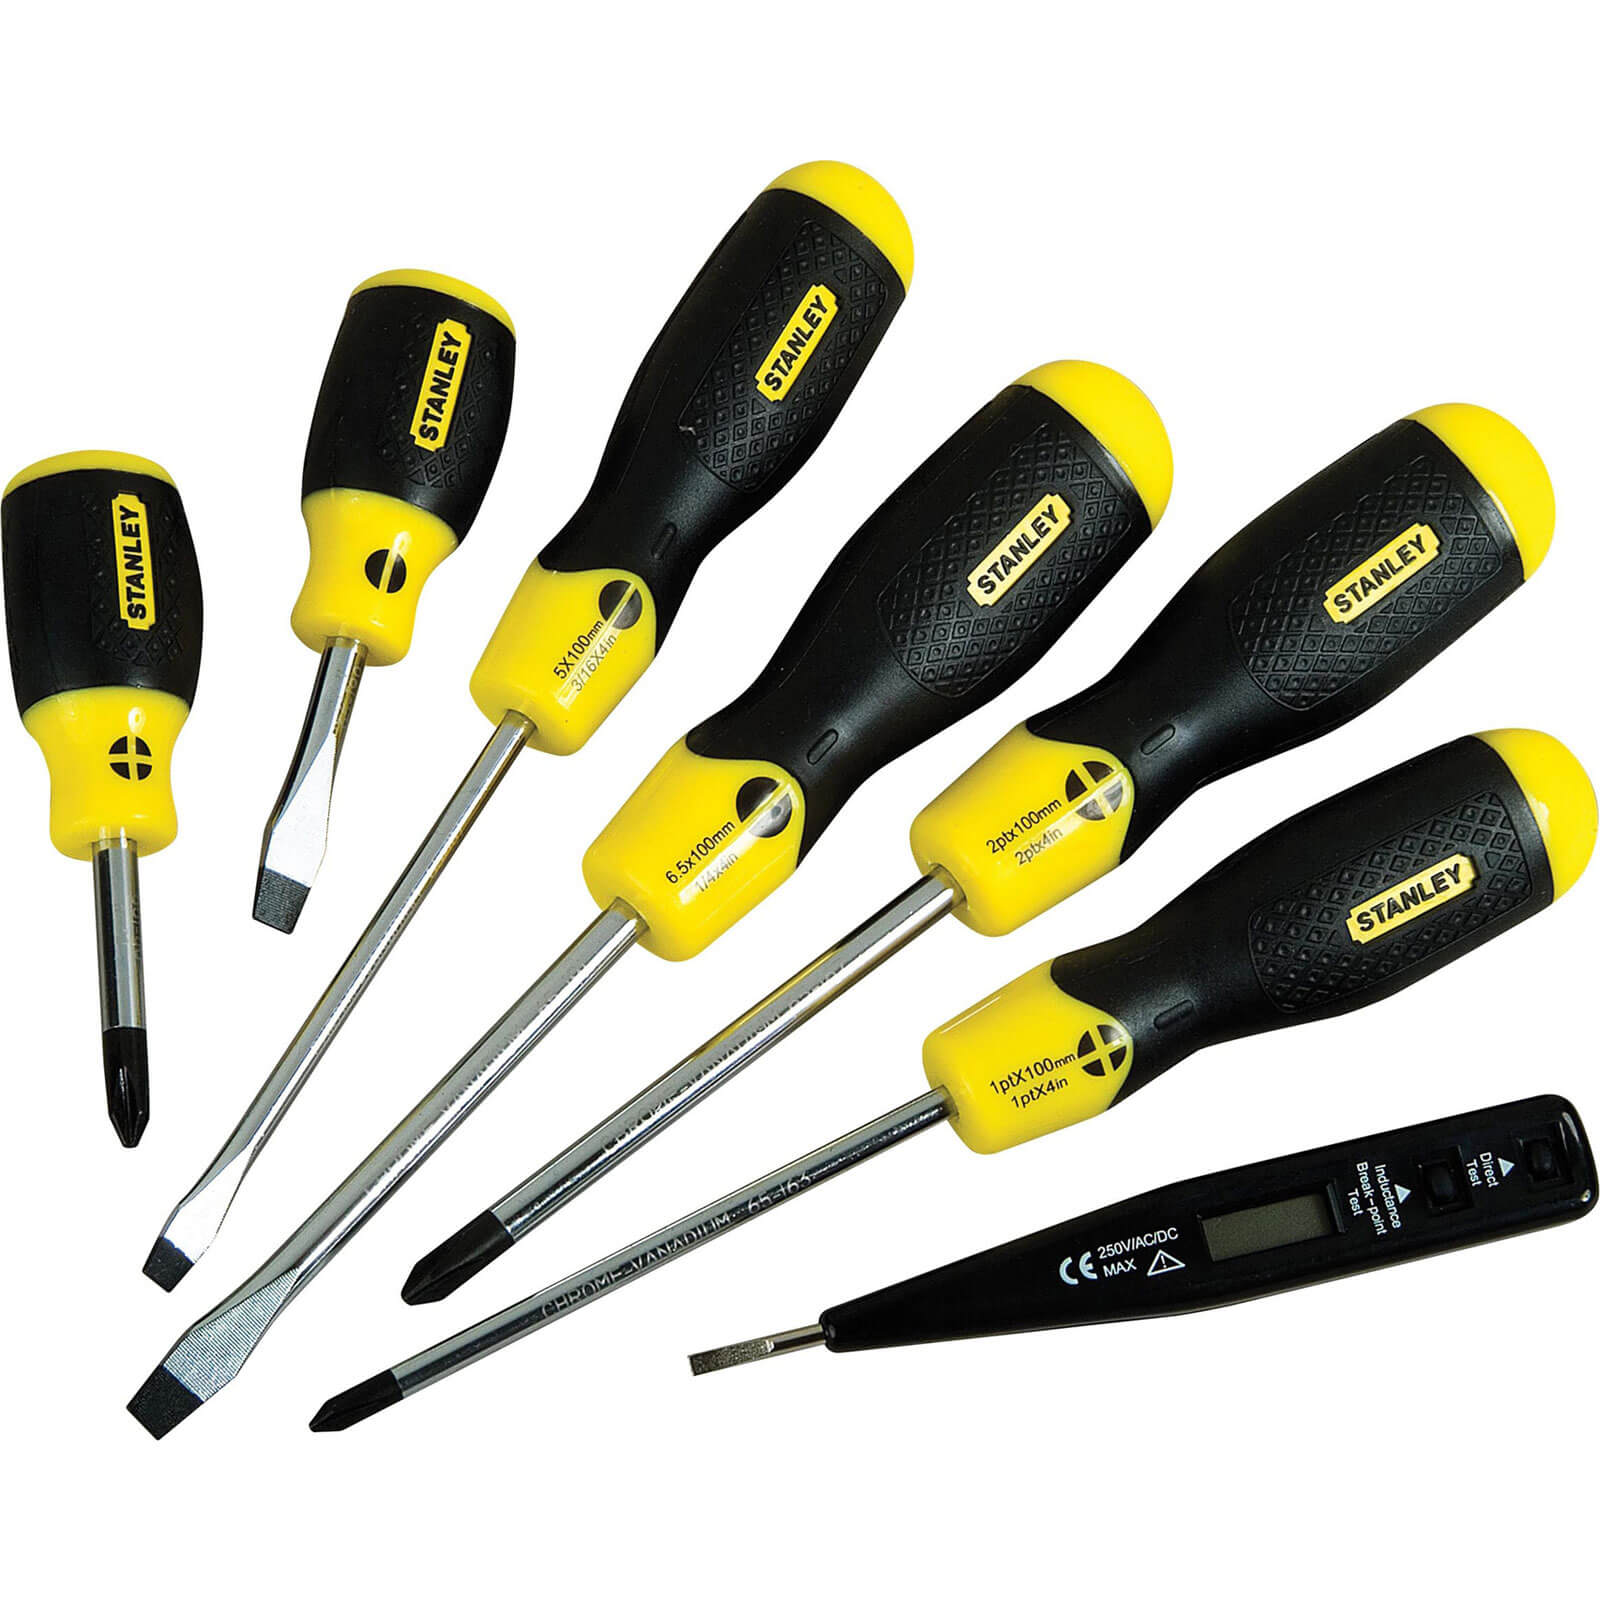 Image of Stanley 6 Piece Cushion Grip Phillips and Slotted Screwdriver Set